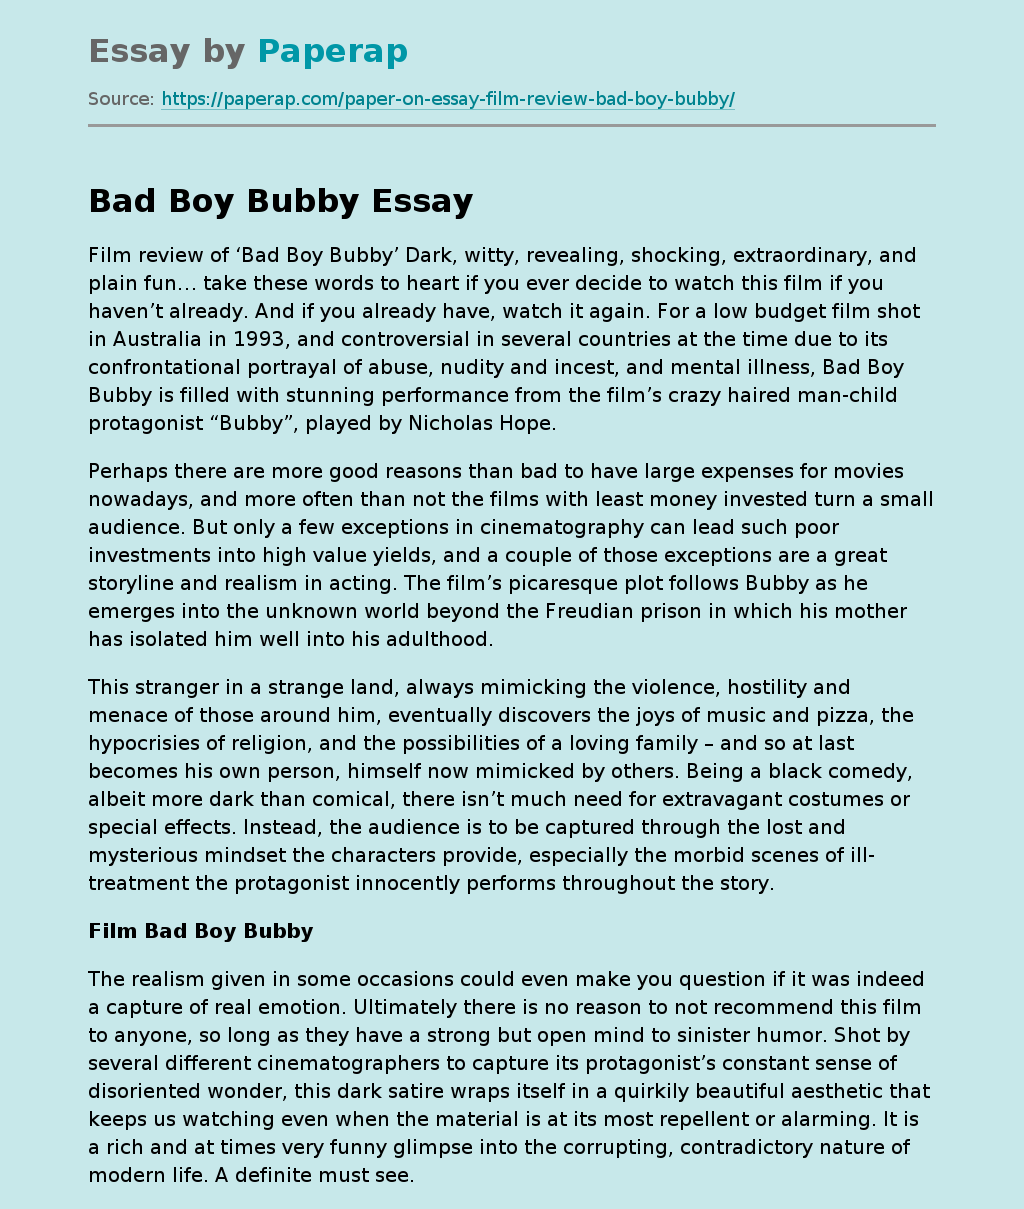 Review of 'Bad Boy Bubby': Dark, Witty and Shocking